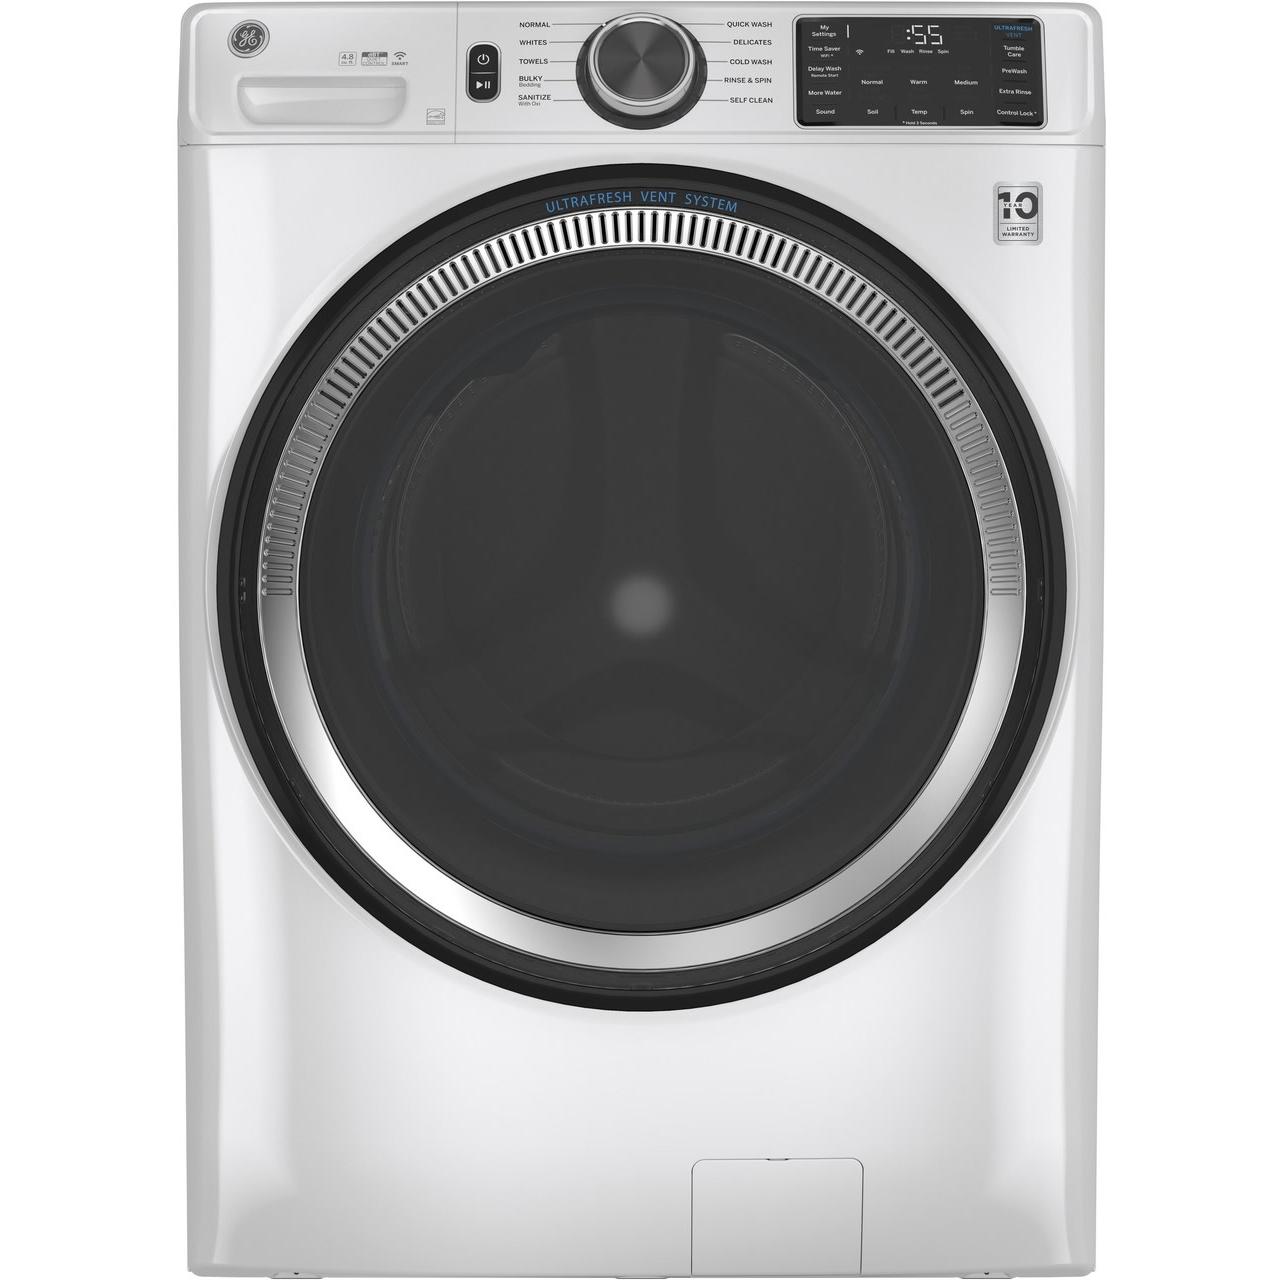 GE 4.8 cu. ft. Front Loading Washer with OdorBlock? GFW550SSNWW